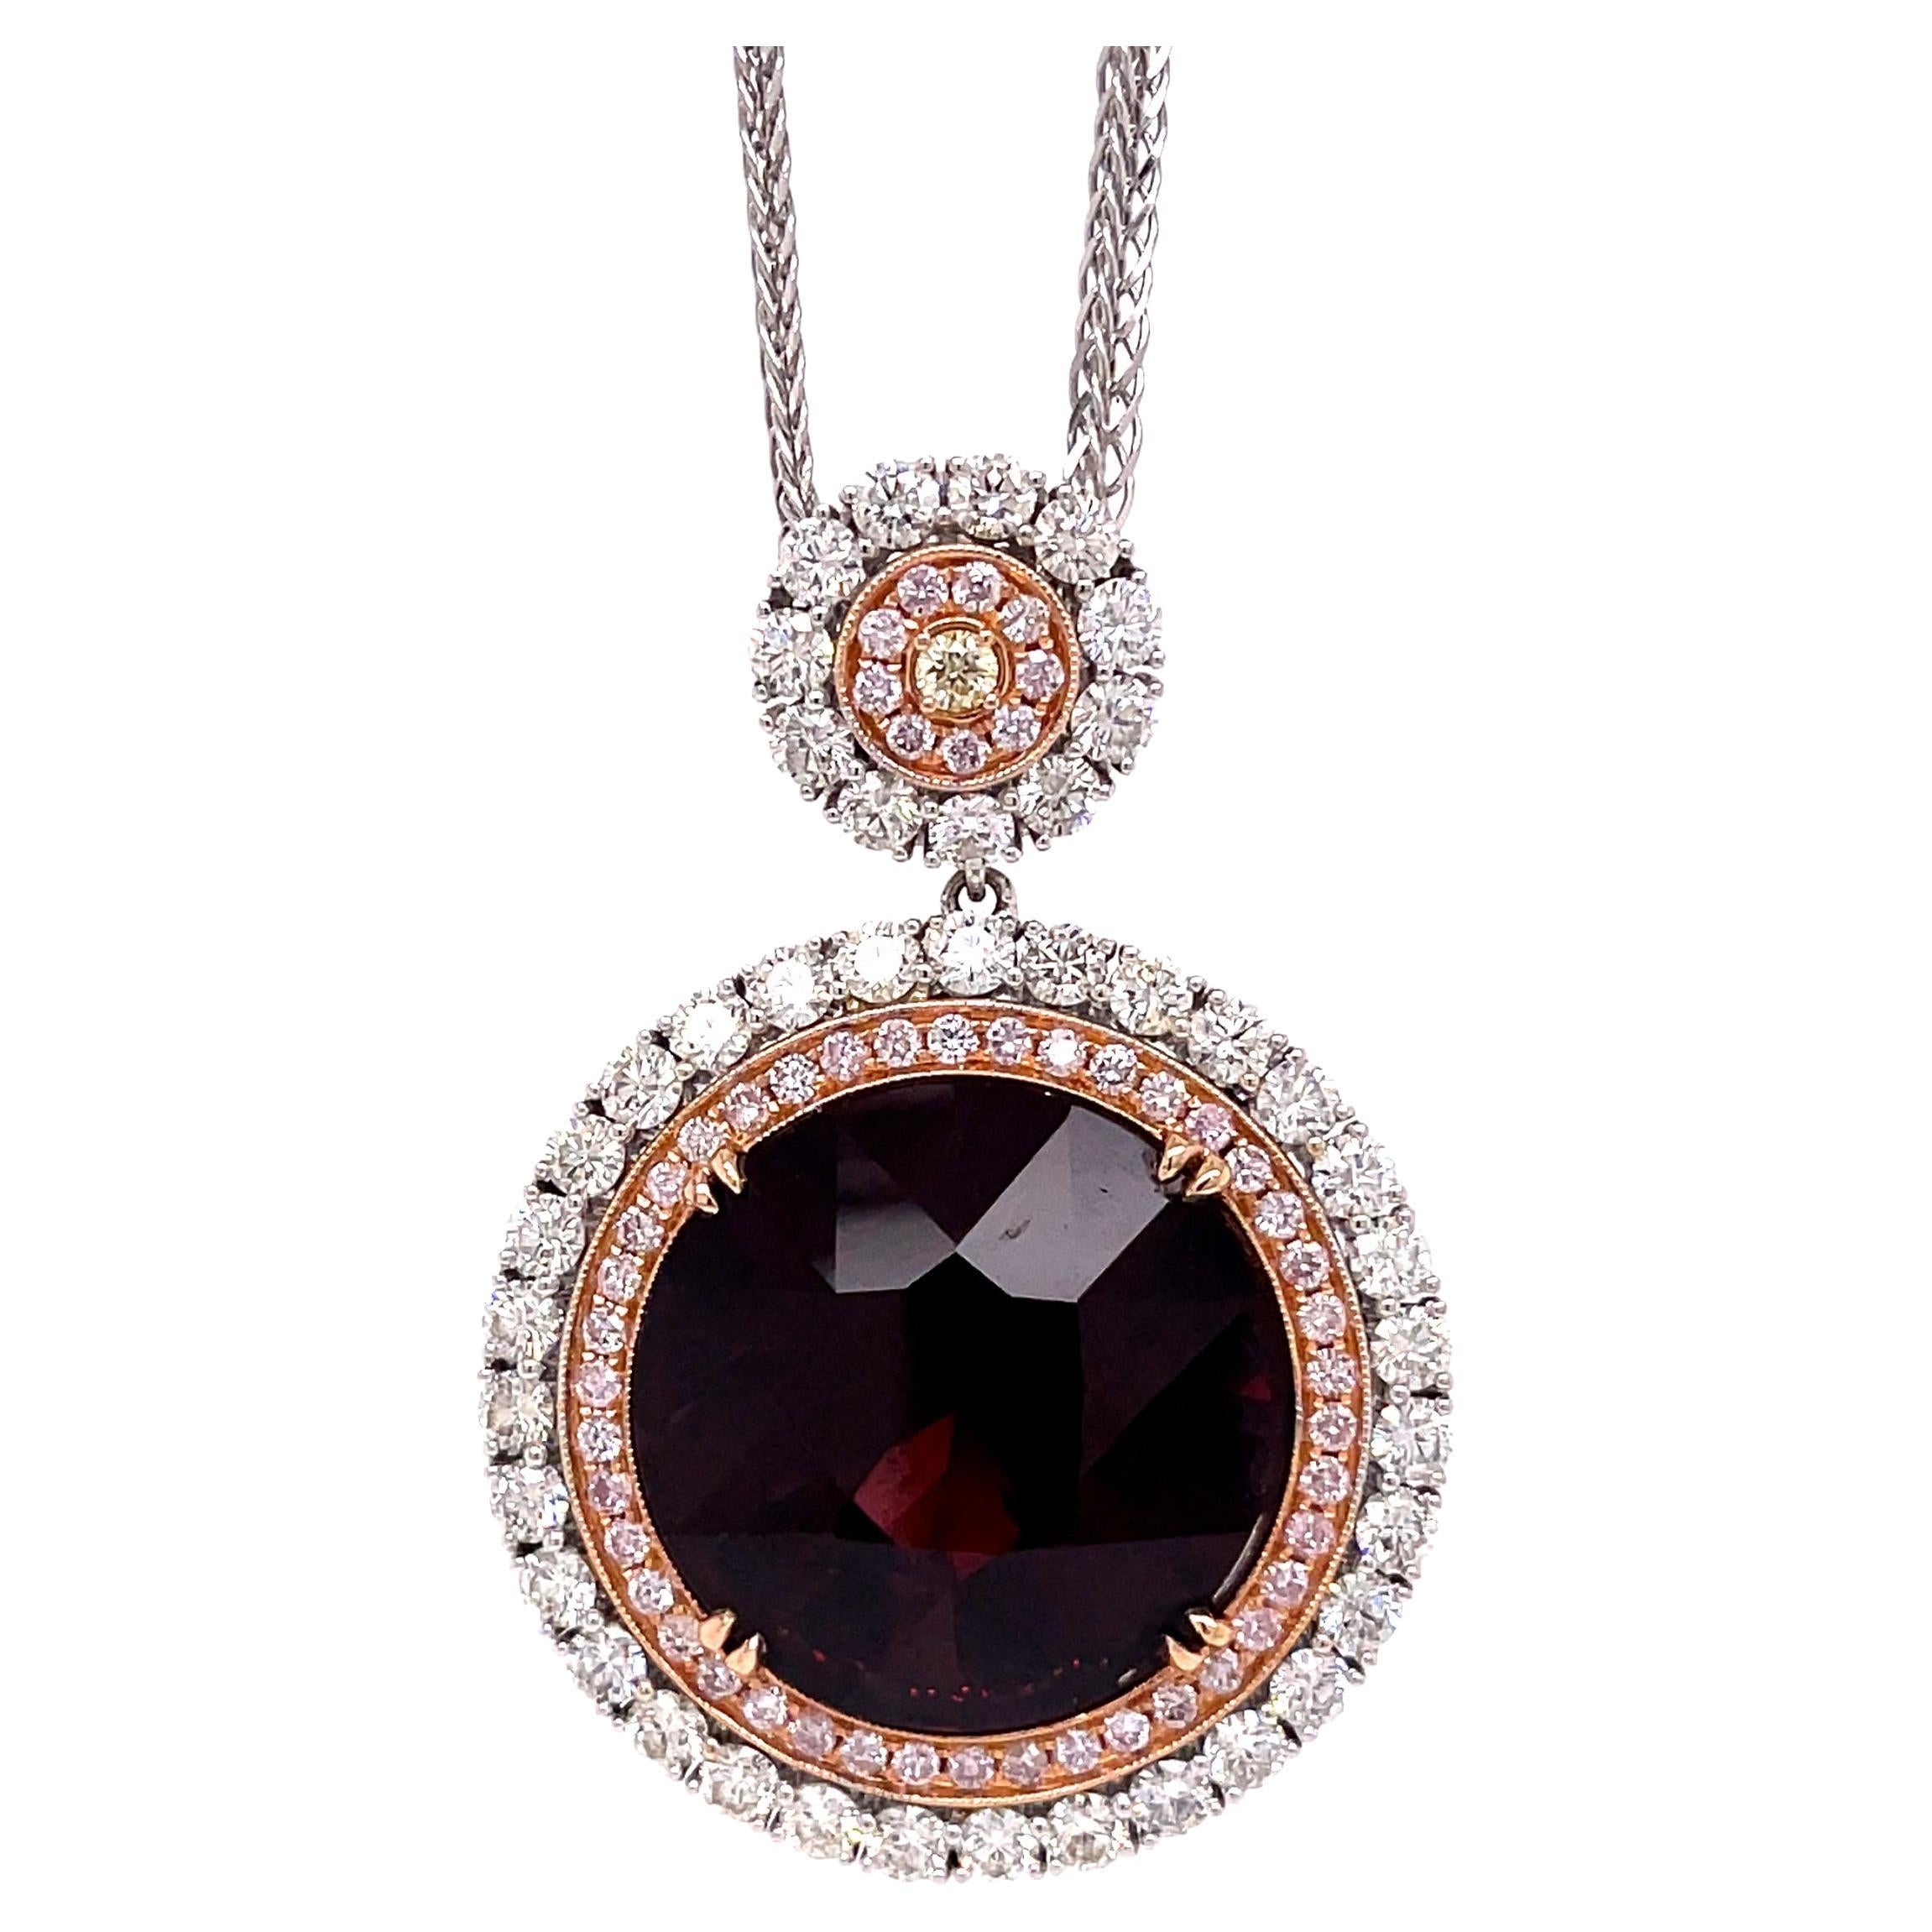 GIA Certified 31.02 Carat Round Faceted Red Spinel & Diamond Pendant in 18KT  For Sale